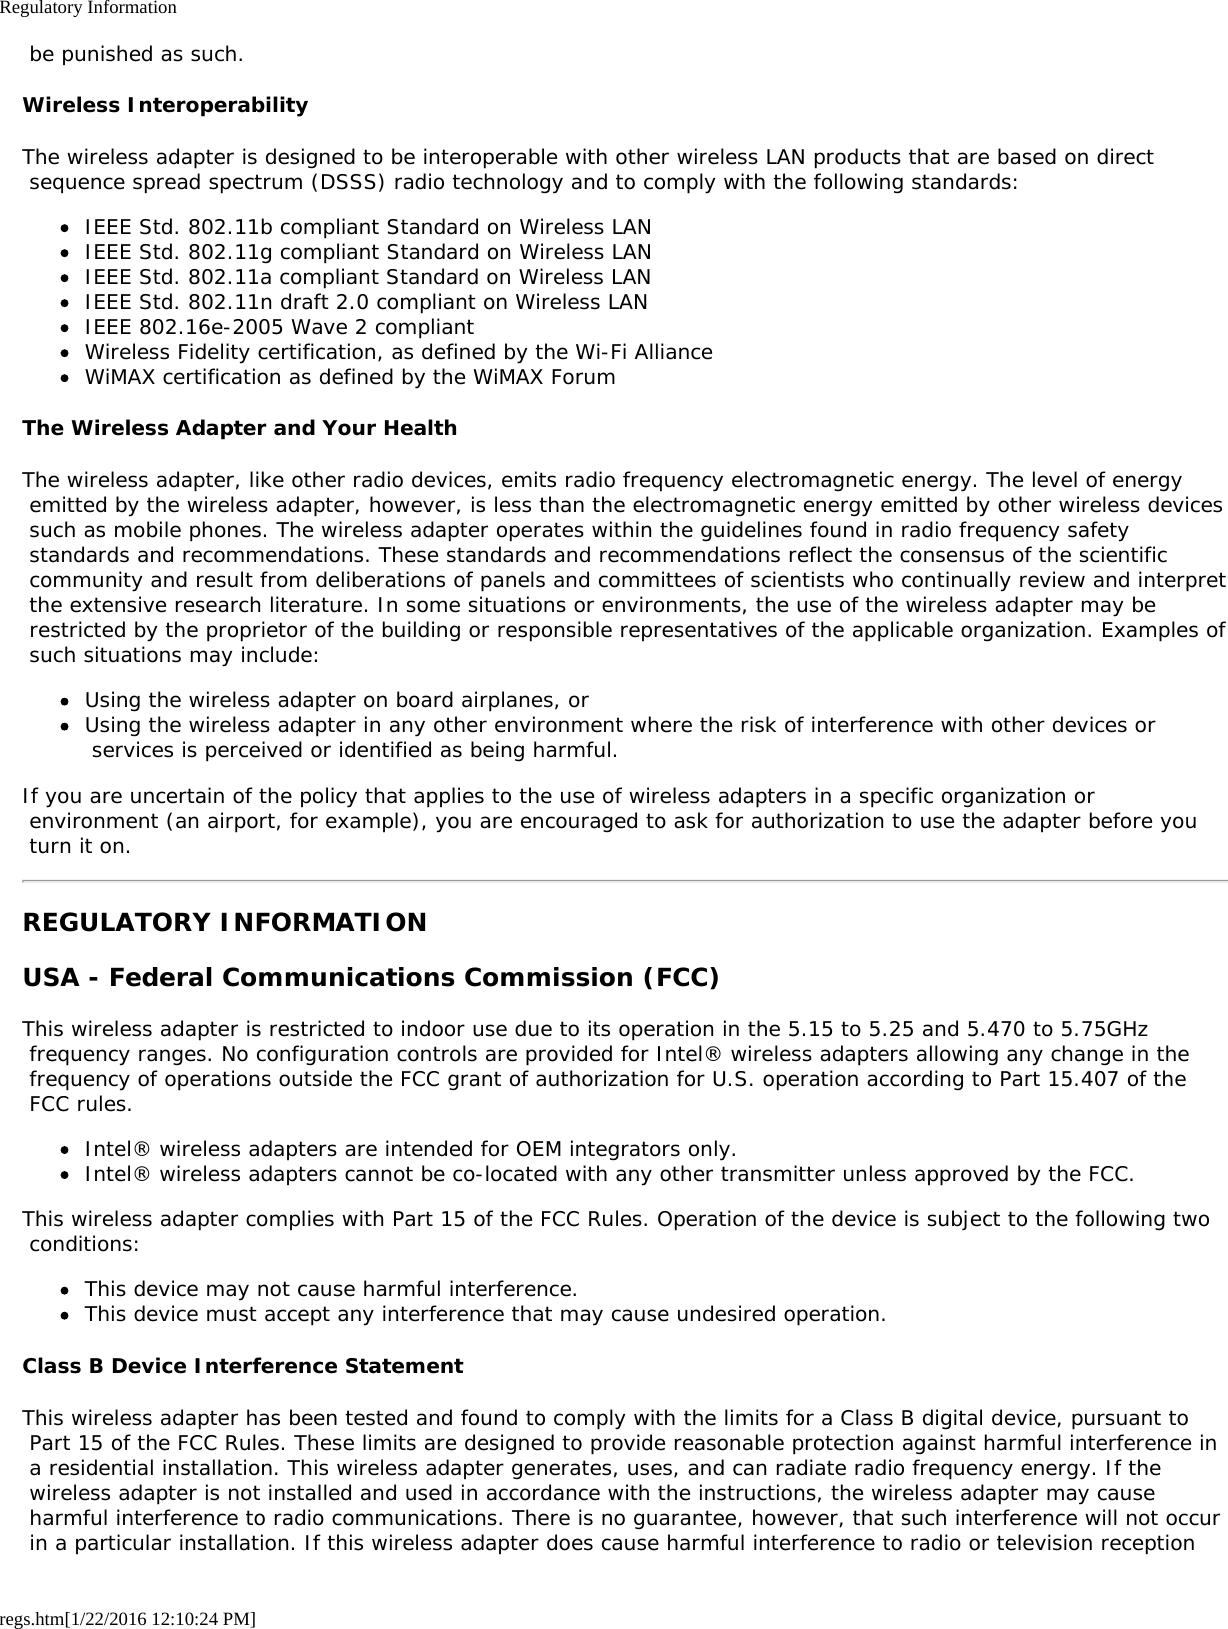 Regulatory Informationregs.htm[1/22/2016 12:10:24 PM] be punished as such.Wireless InteroperabilityThe wireless adapter is designed to be interoperable with other wireless LAN products that are based on direct sequence spread spectrum (DSSS) radio technology and to comply with the following standards:IEEE Std. 802.11b compliant Standard on Wireless LANIEEE Std. 802.11g compliant Standard on Wireless LANIEEE Std. 802.11a compliant Standard on Wireless LANIEEE Std. 802.11n draft 2.0 compliant on Wireless LANIEEE 802.16e-2005 Wave 2 compliantWireless Fidelity certification, as defined by the Wi-Fi AllianceWiMAX certification as defined by the WiMAX ForumThe Wireless Adapter and Your HealthThe wireless adapter, like other radio devices, emits radio frequency electromagnetic energy. The level of energy emitted by the wireless adapter, however, is less than the electromagnetic energy emitted by other wireless devices such as mobile phones. The wireless adapter operates within the guidelines found in radio frequency safety standards and recommendations. These standards and recommendations reflect the consensus of the scientific community and result from deliberations of panels and committees of scientists who continually review and interpret the extensive research literature. In some situations or environments, the use of the wireless adapter may be restricted by the proprietor of the building or responsible representatives of the applicable organization. Examples of such situations may include:Using the wireless adapter on board airplanes, orUsing the wireless adapter in any other environment where the risk of interference with other devices or services is perceived or identified as being harmful.If you are uncertain of the policy that applies to the use of wireless adapters in a specific organization or environment (an airport, for example), you are encouraged to ask for authorization to use the adapter before you turn it on.REGULATORY INFORMATIONUSA - Federal Communications Commission (FCC)This wireless adapter is restricted to indoor use due to its operation in the 5.15 to 5.25 and 5.470 to 5.75GHz frequency ranges. No configuration controls are provided for Intel® wireless adapters allowing any change in the frequency of operations outside the FCC grant of authorization for U.S. operation according to Part 15.407 of the FCC rules.Intel® wireless adapters are intended for OEM integrators only.Intel® wireless adapters cannot be co-located with any other transmitter unless approved by the FCC.This wireless adapter complies with Part 15 of the FCC Rules. Operation of the device is subject to the following two conditions:This device may not cause harmful interference.This device must accept any interference that may cause undesired operation.Class B Device Interference StatementThis wireless adapter has been tested and found to comply with the limits for a Class B digital device, pursuant to Part 15 of the FCC Rules. These limits are designed to provide reasonable protection against harmful interference in a residential installation. This wireless adapter generates, uses, and can radiate radio frequency energy. If the wireless adapter is not installed and used in accordance with the instructions, the wireless adapter may cause harmful interference to radio communications. There is no guarantee, however, that such interference will not occur in a particular installation. If this wireless adapter does cause harmful interference to radio or television reception